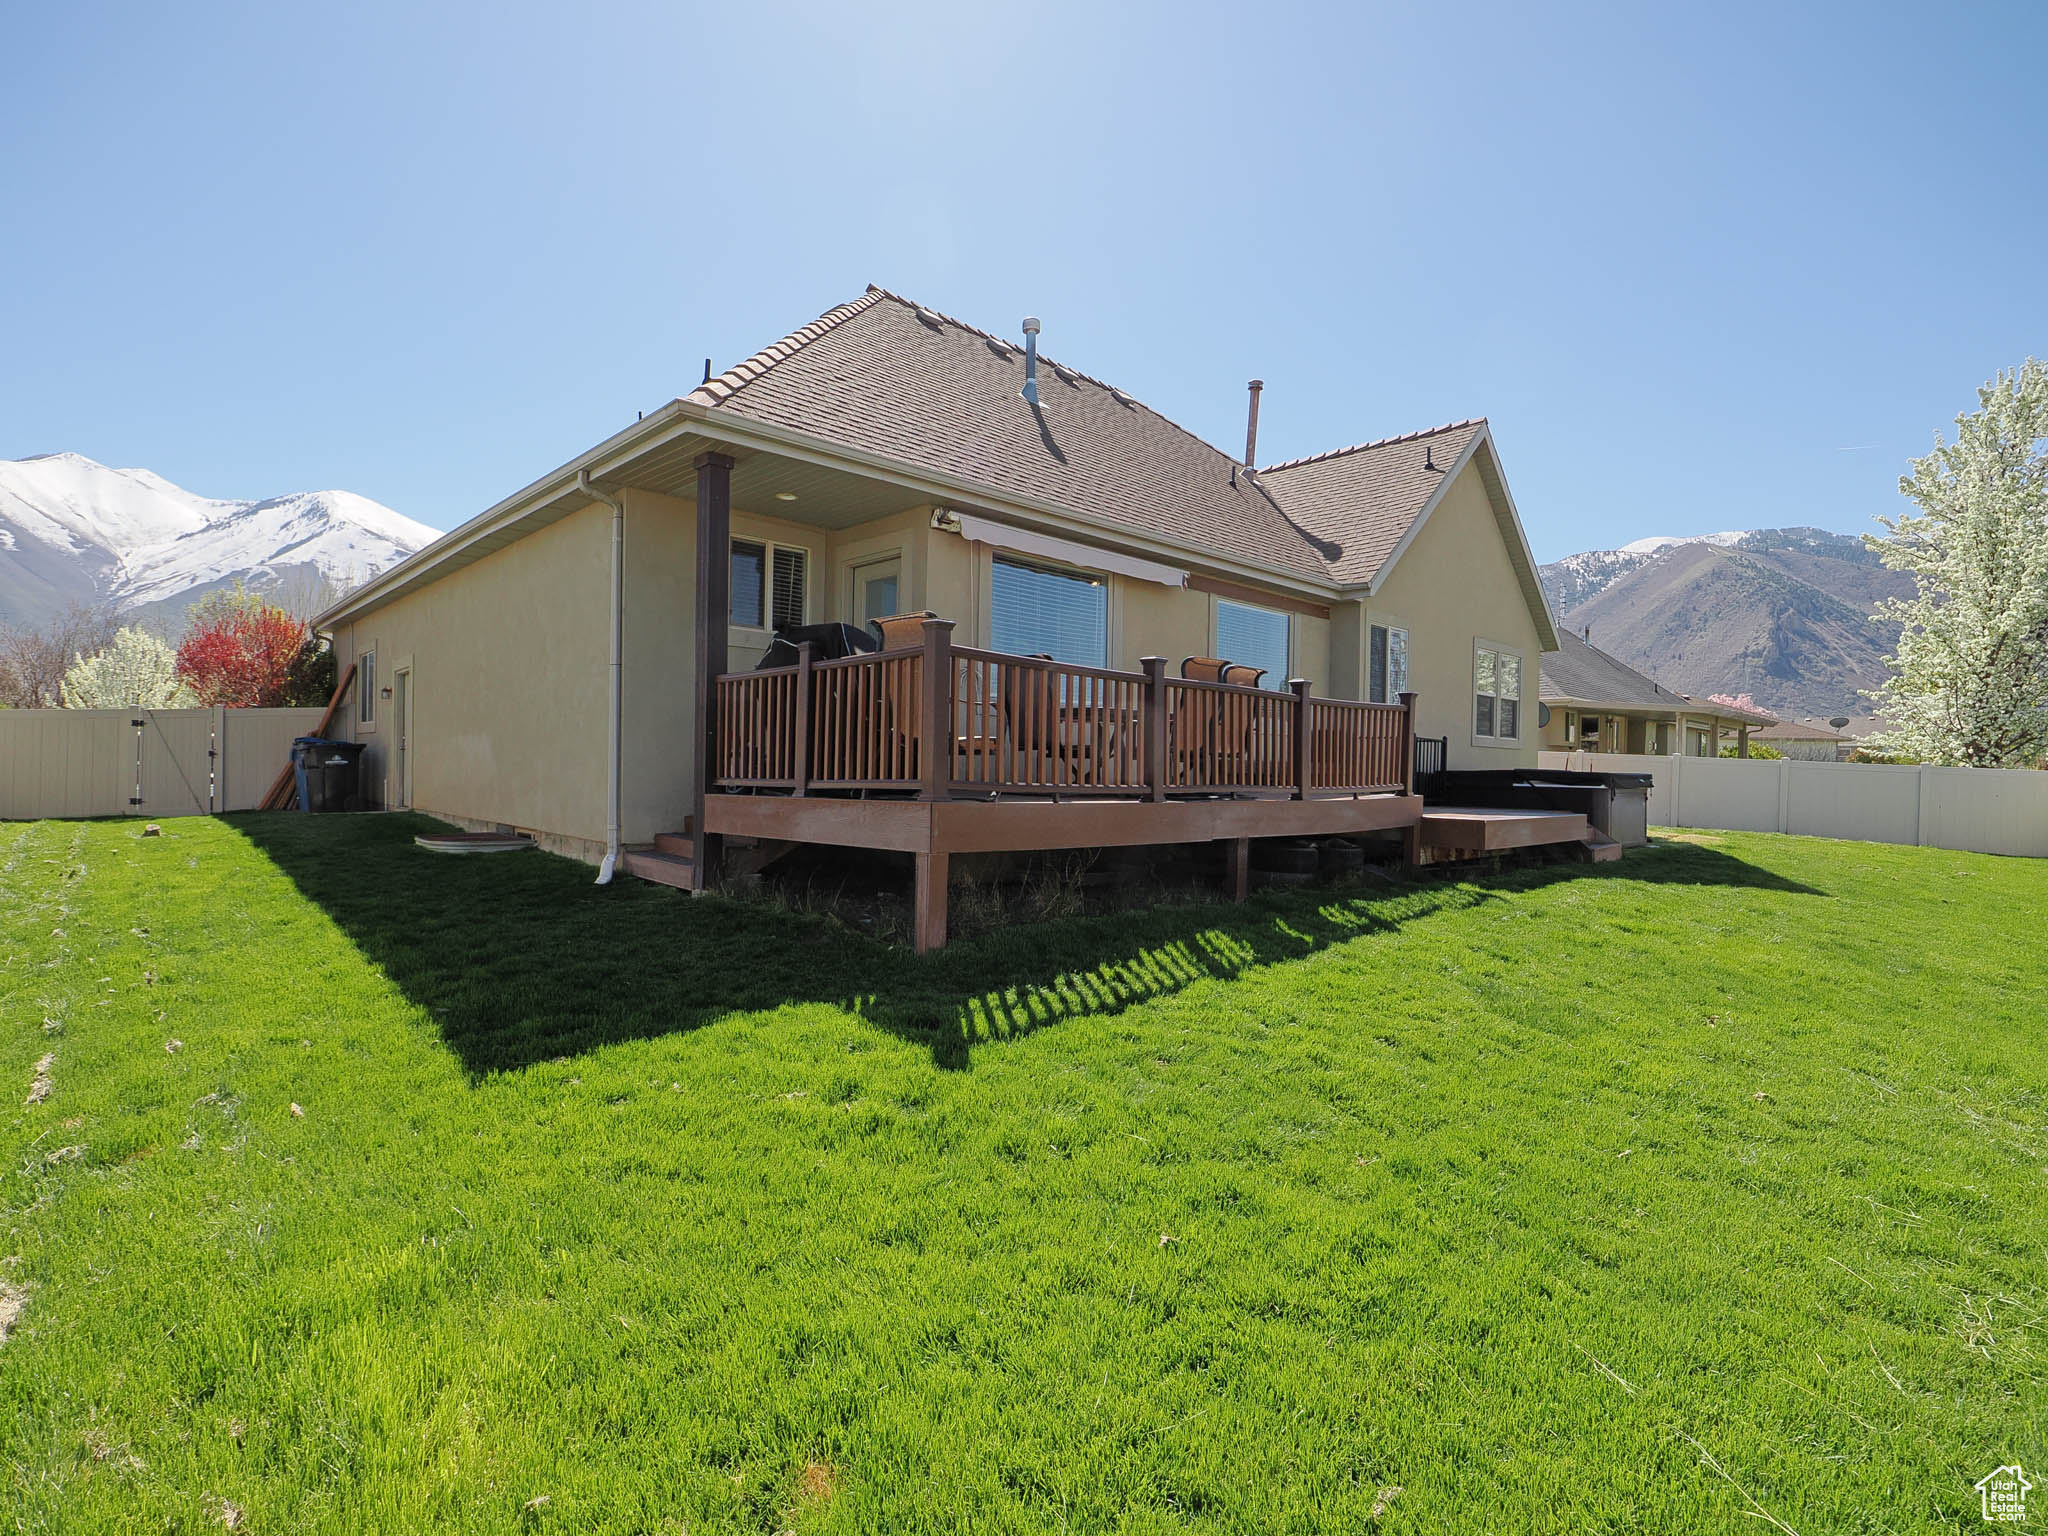 Rear view of house with a lawn and trex deck with mountain view